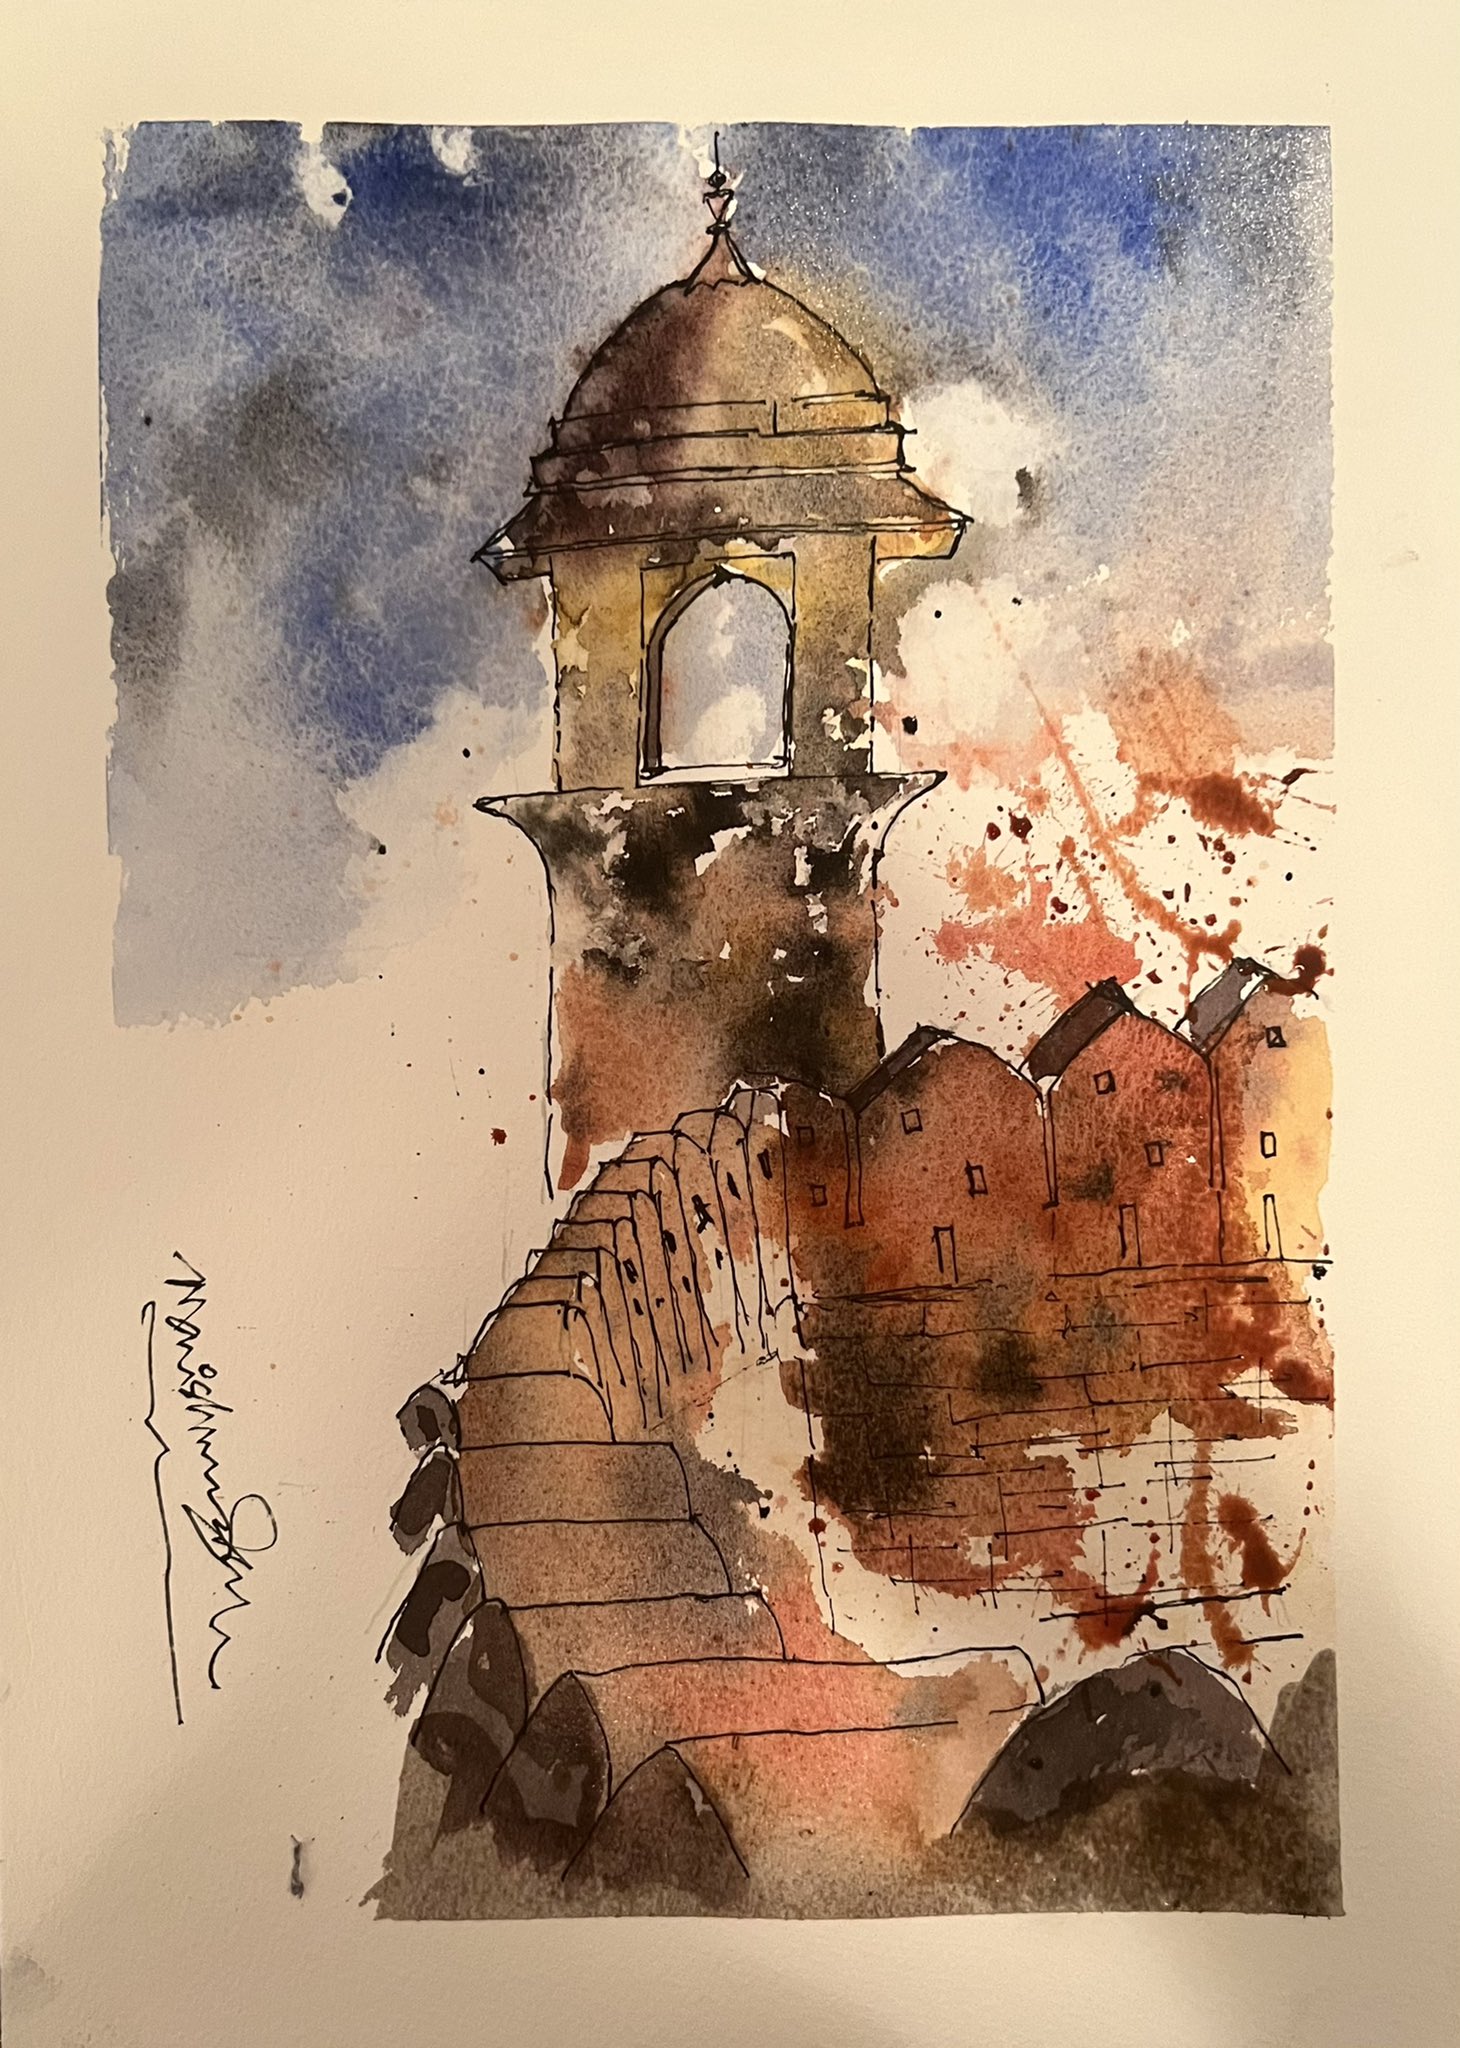 Manish Mundra on X: Hope you like this watercolor painting done by me.  #Keeplearning !! #Watercolors!! #passion #art #life   / X